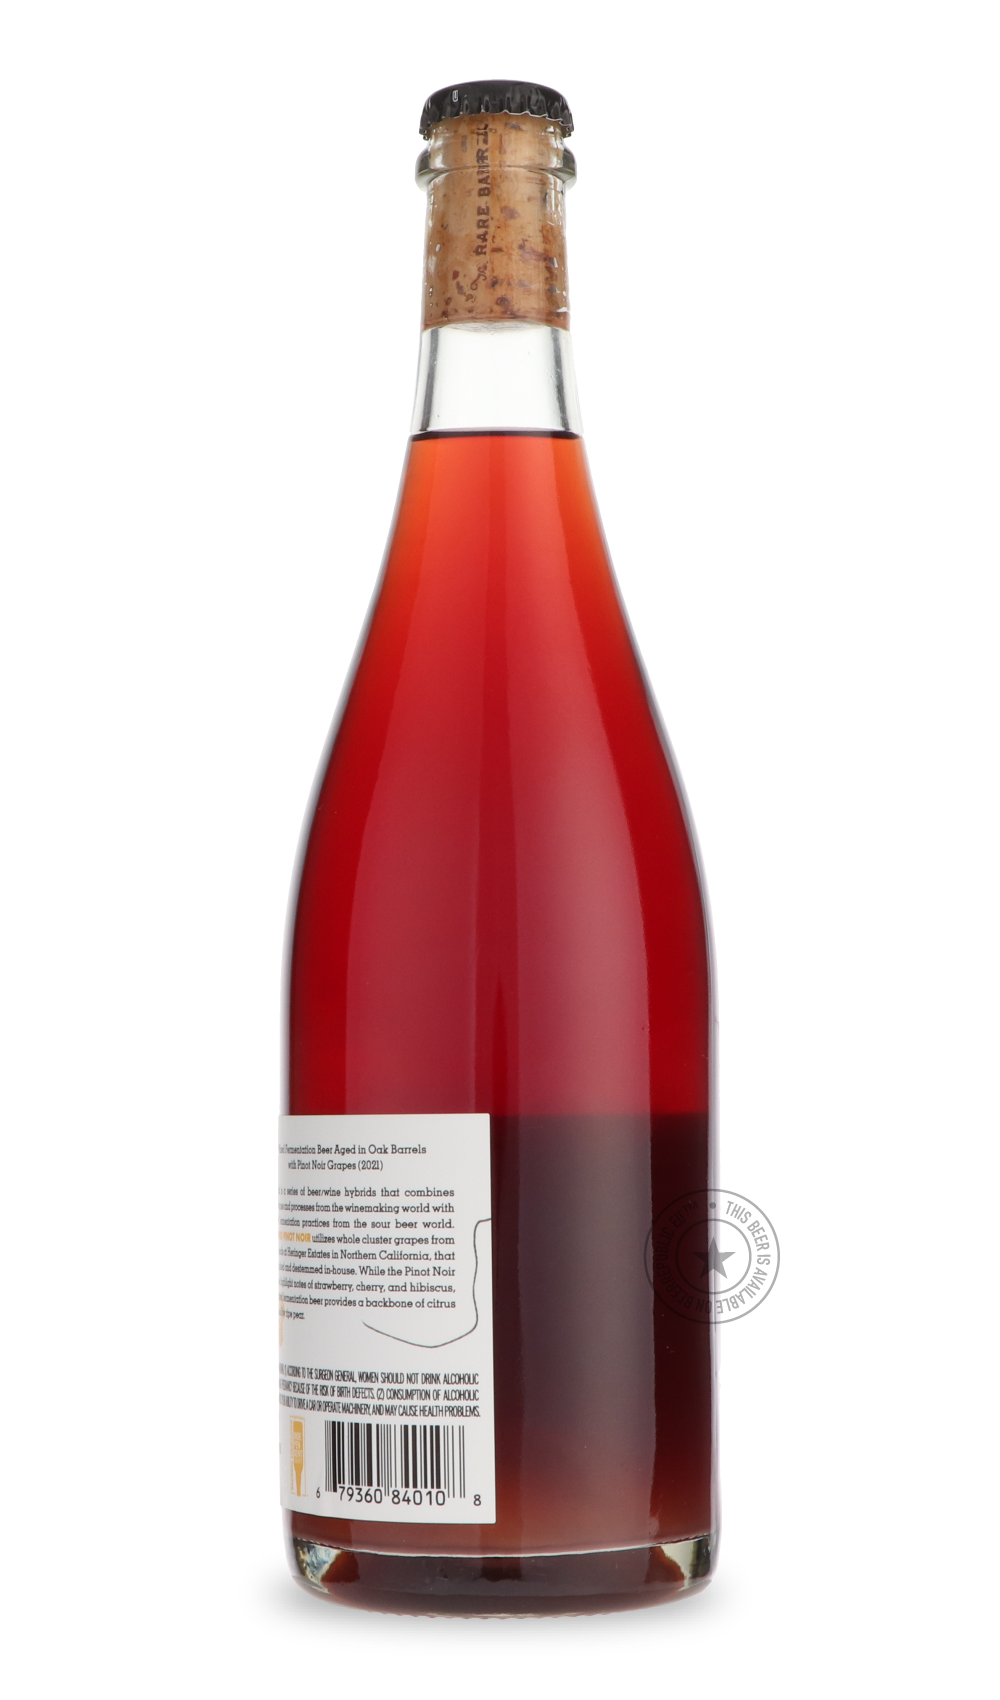 -The Rare Barrel- Blurred Pinot Noir Grapes-Sour / Wild & Fruity- Only @ Beer Republic - The best online beer store for American & Canadian craft beer - Buy beer online from the USA and Canada - Bier online kopen - Amerikaans bier kopen - Craft beer store - Craft beer kopen - Amerikanisch bier kaufen - Bier online kaufen - Acheter biere online - IPA - Stout - Porter - New England IPA - Hazy IPA - Imperial Stout - Barrel Aged - Barrel Aged Imperial Stout - Brown - Dark beer - Blond - Blonde - Pilsner - Lager